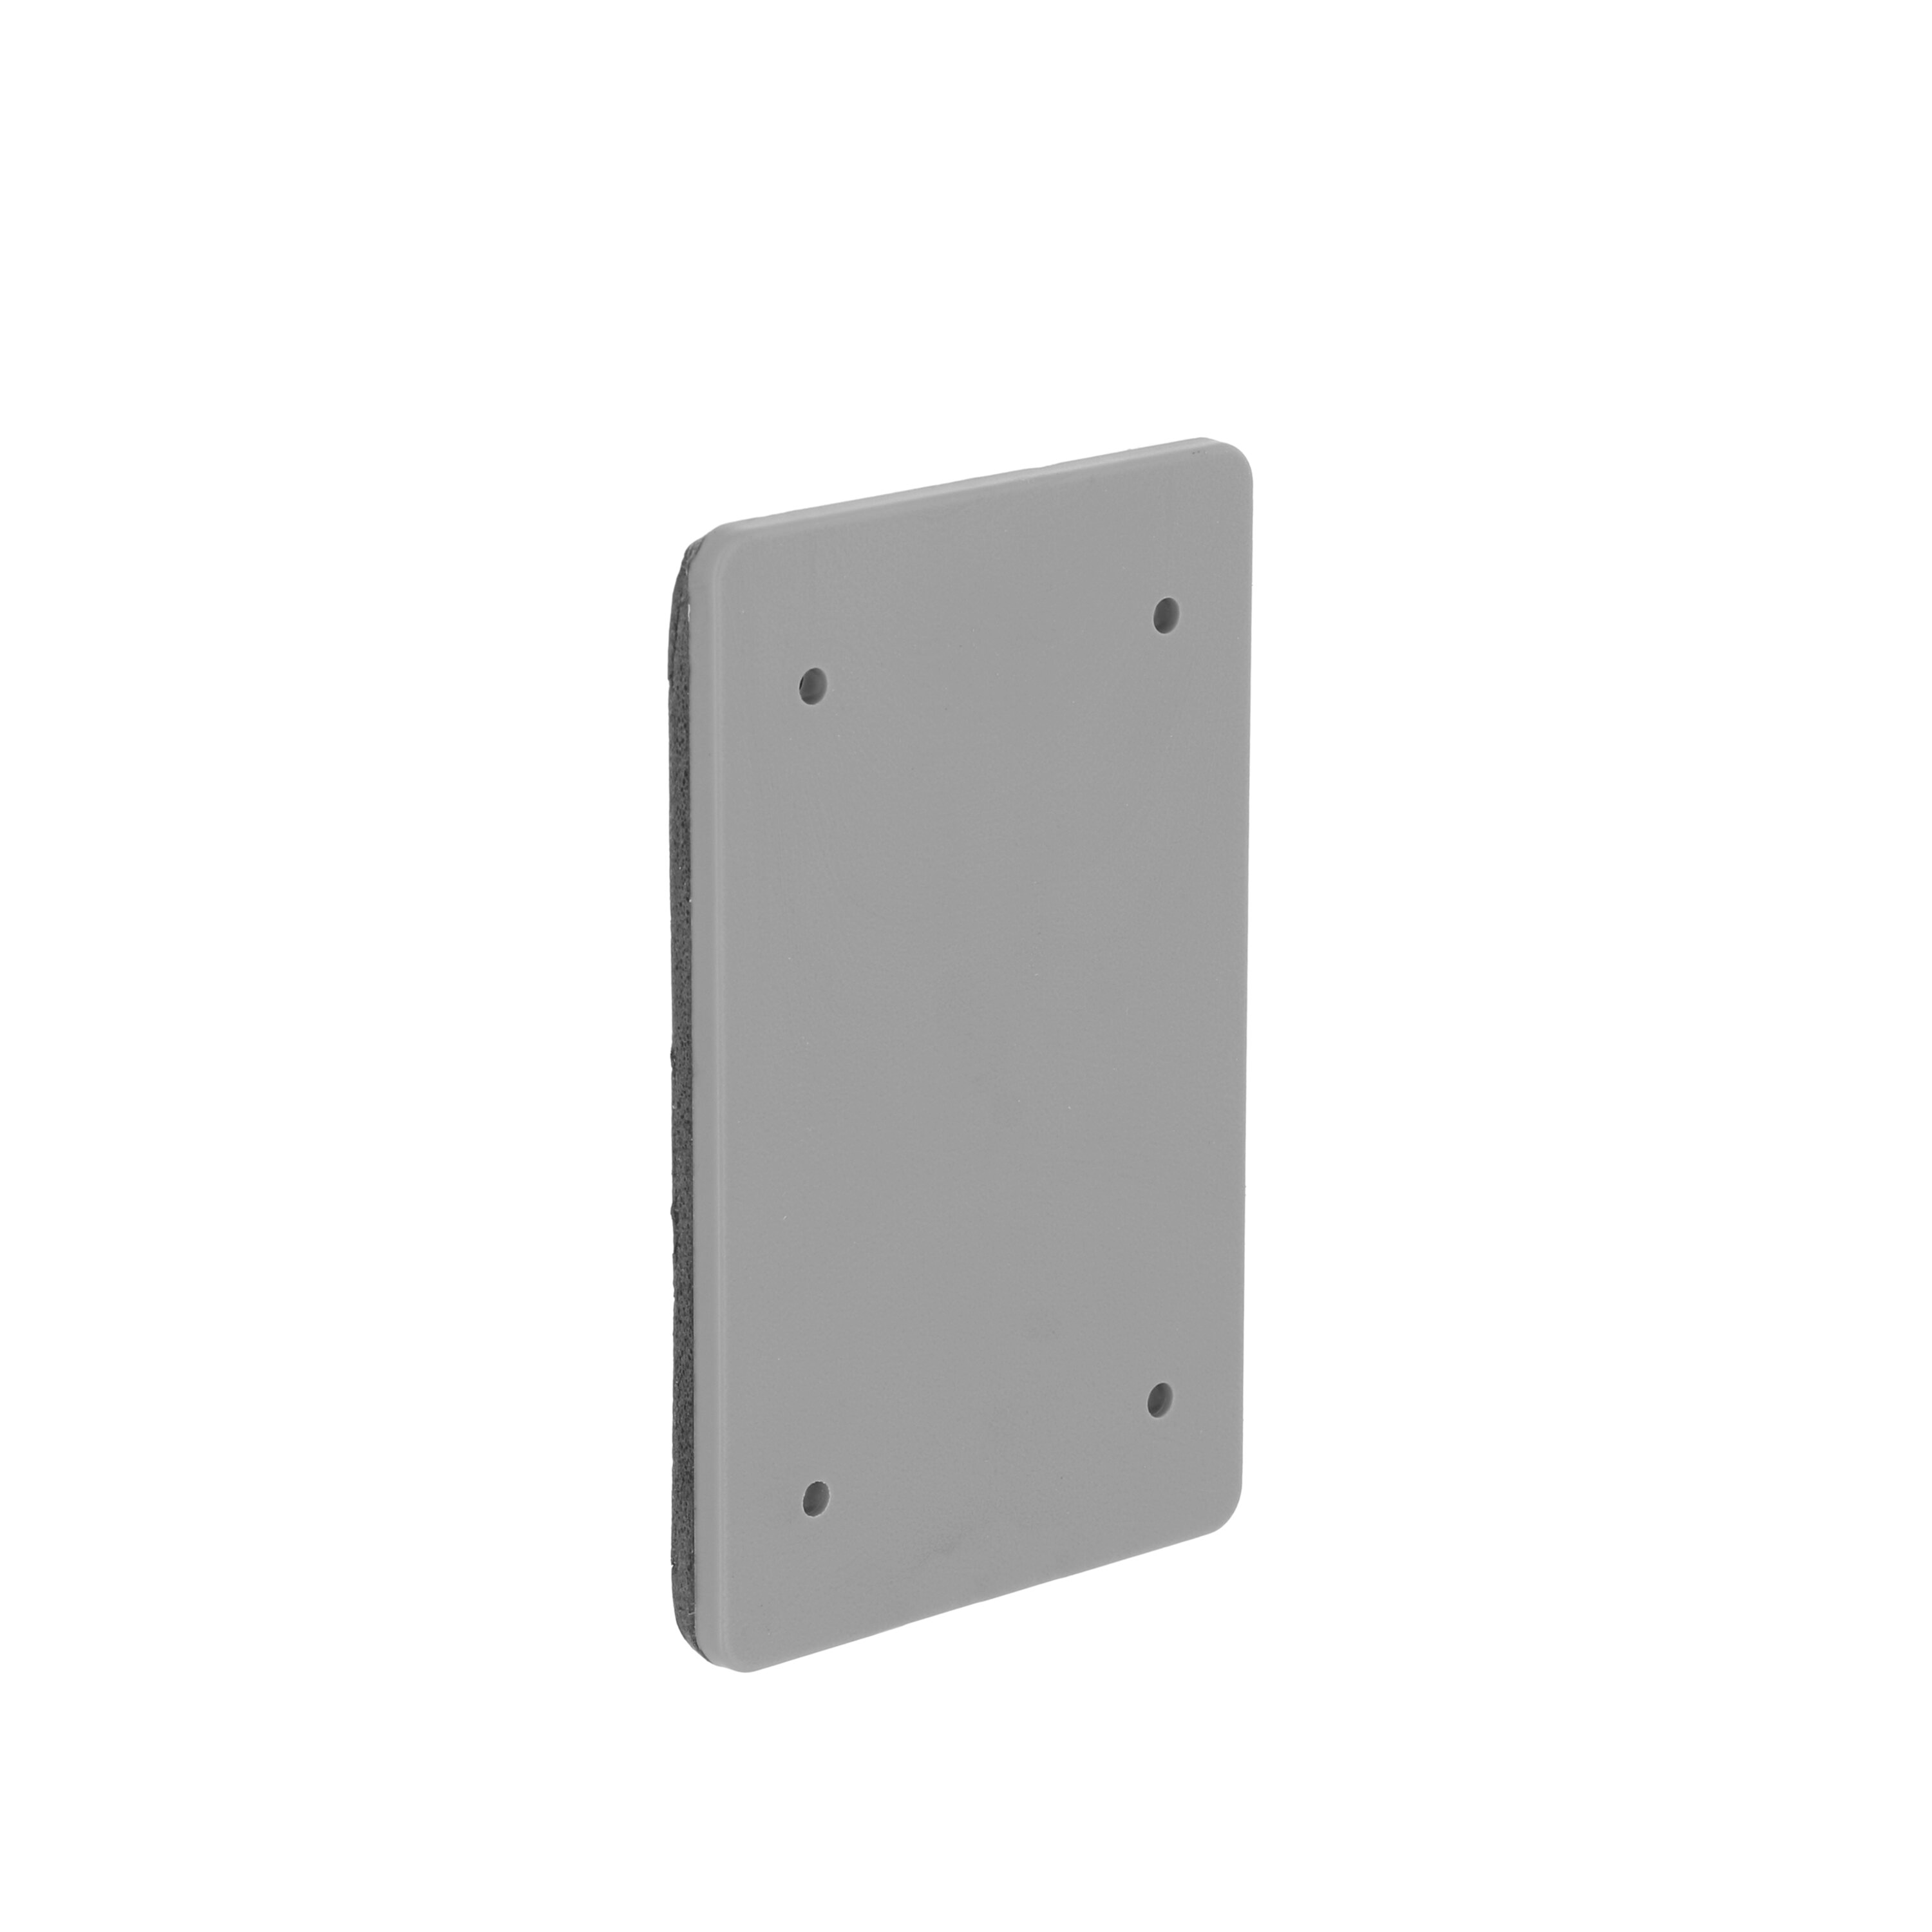 TayMac 1-Gang Rectangle Plastic Weatherproof Electrical Box Cover